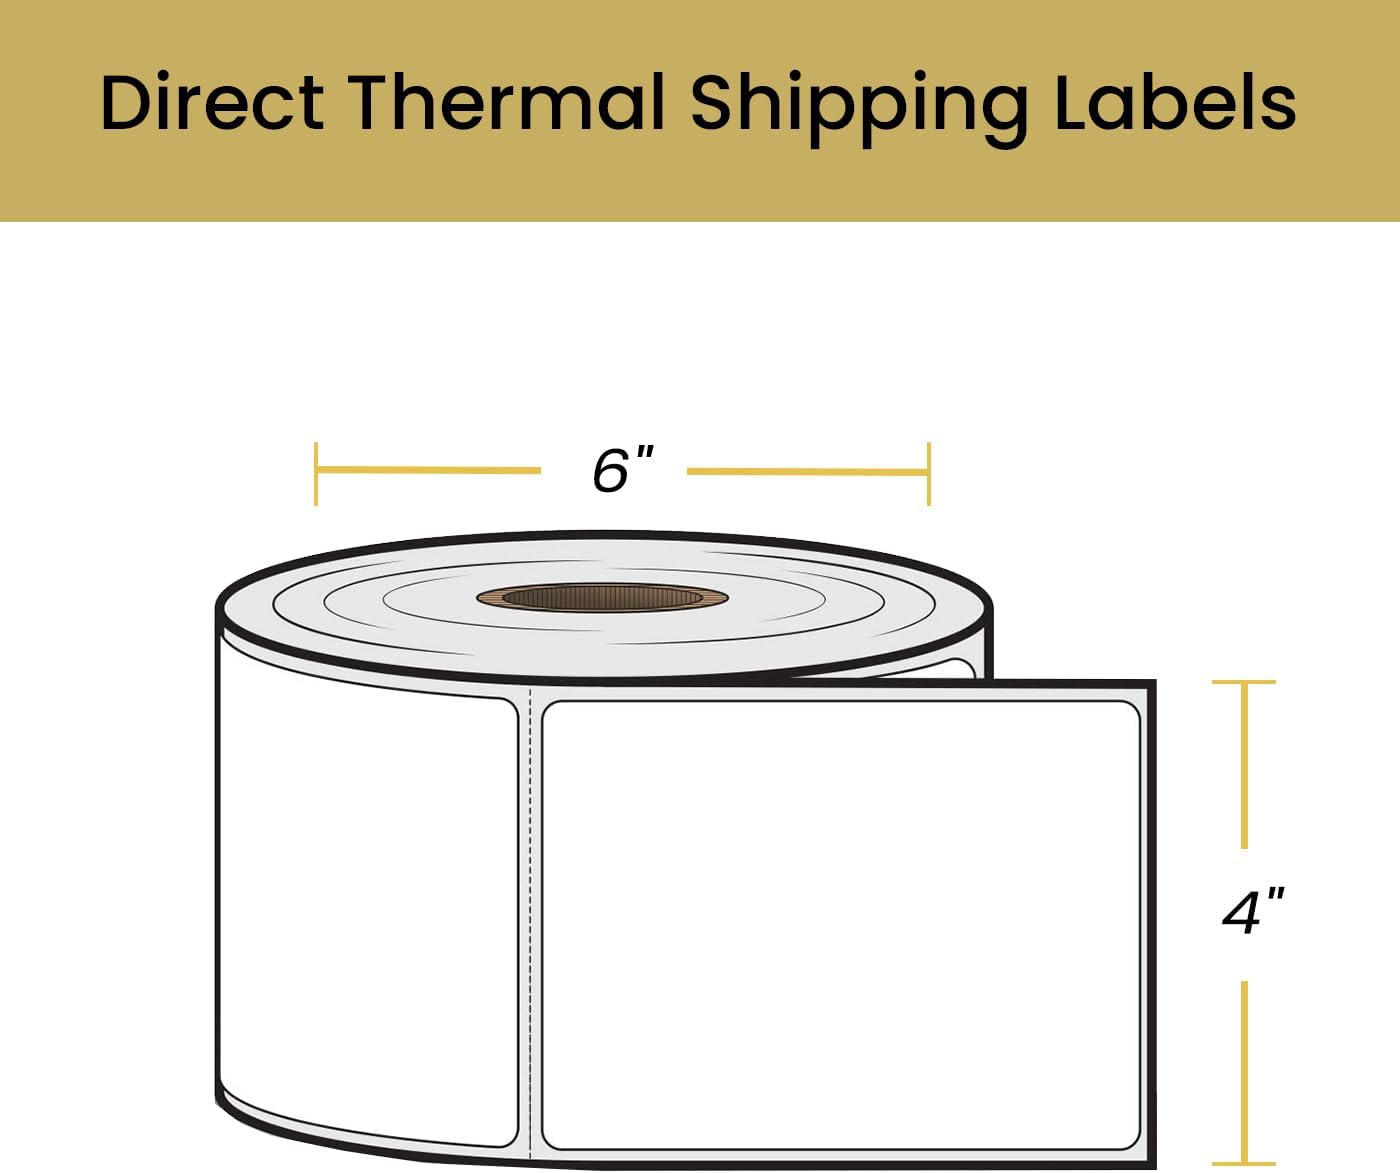 4x6 Direct Thermal Shipping Labels - BPA Free, Perforated & Waterproof | Compatible with Rollo, DYMO 4XL & Zebra Desktop| 330 Labels/Rolls (Pack of 12 Rolls)